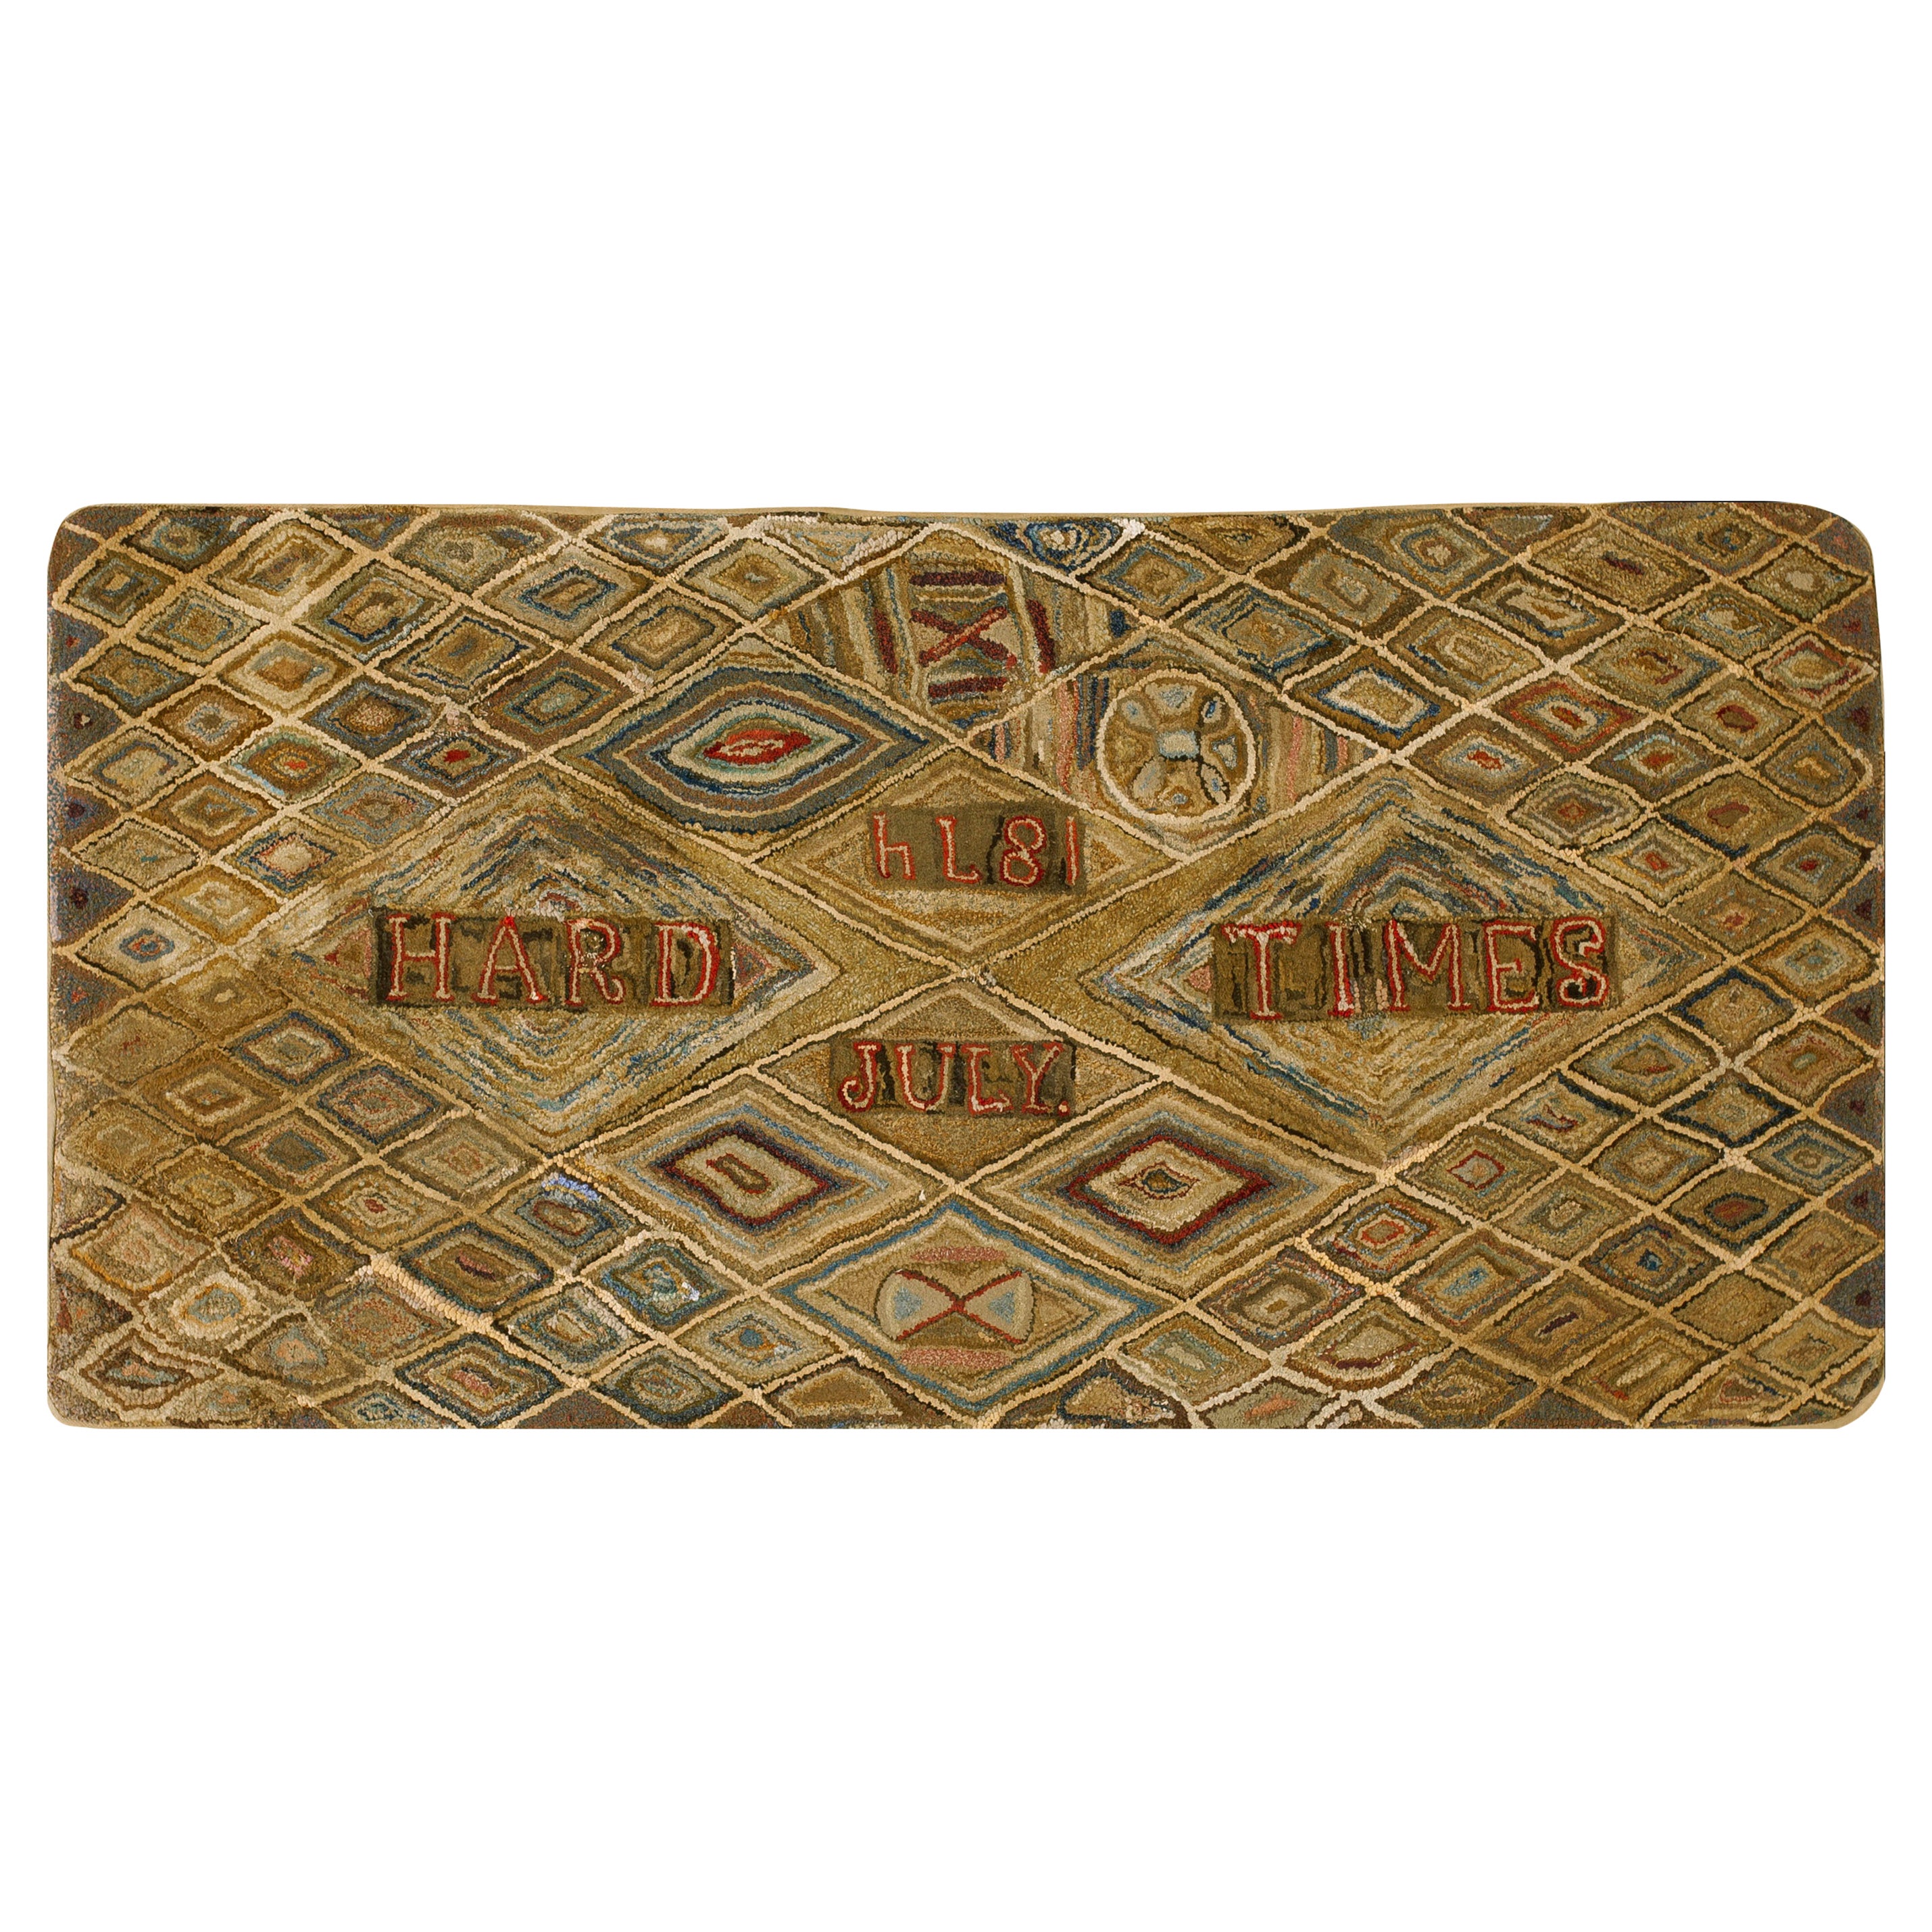 American Hooked Rug From 1870s ( 3'1" x 6'1" - 94 x 185 cm )